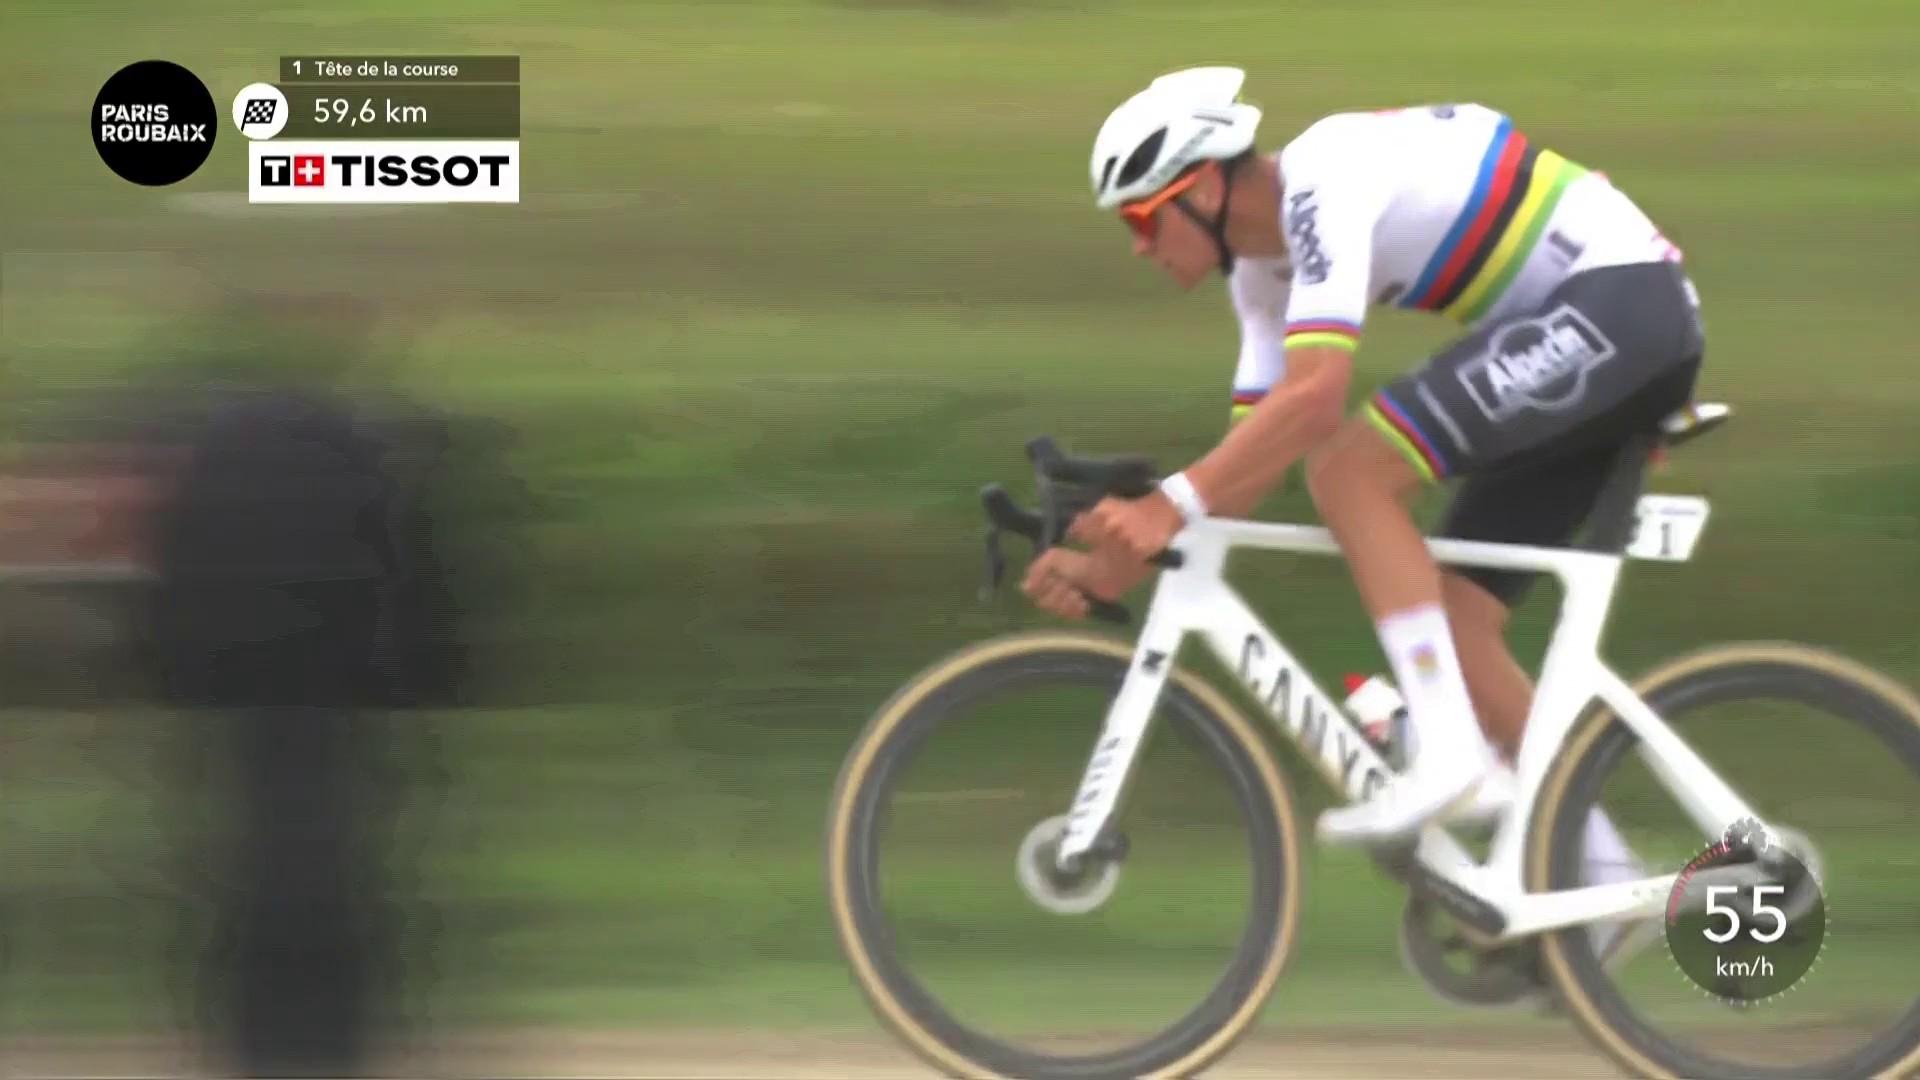 The reigning world champion, Mathieu van der Poel, after being forgotten for several kilometers, has just launched a breakaway less than 60 km from the finish.  After having achieved a good performance in the Trouée d'Arenberg, the Dutchman is now ahead of his pursuers.